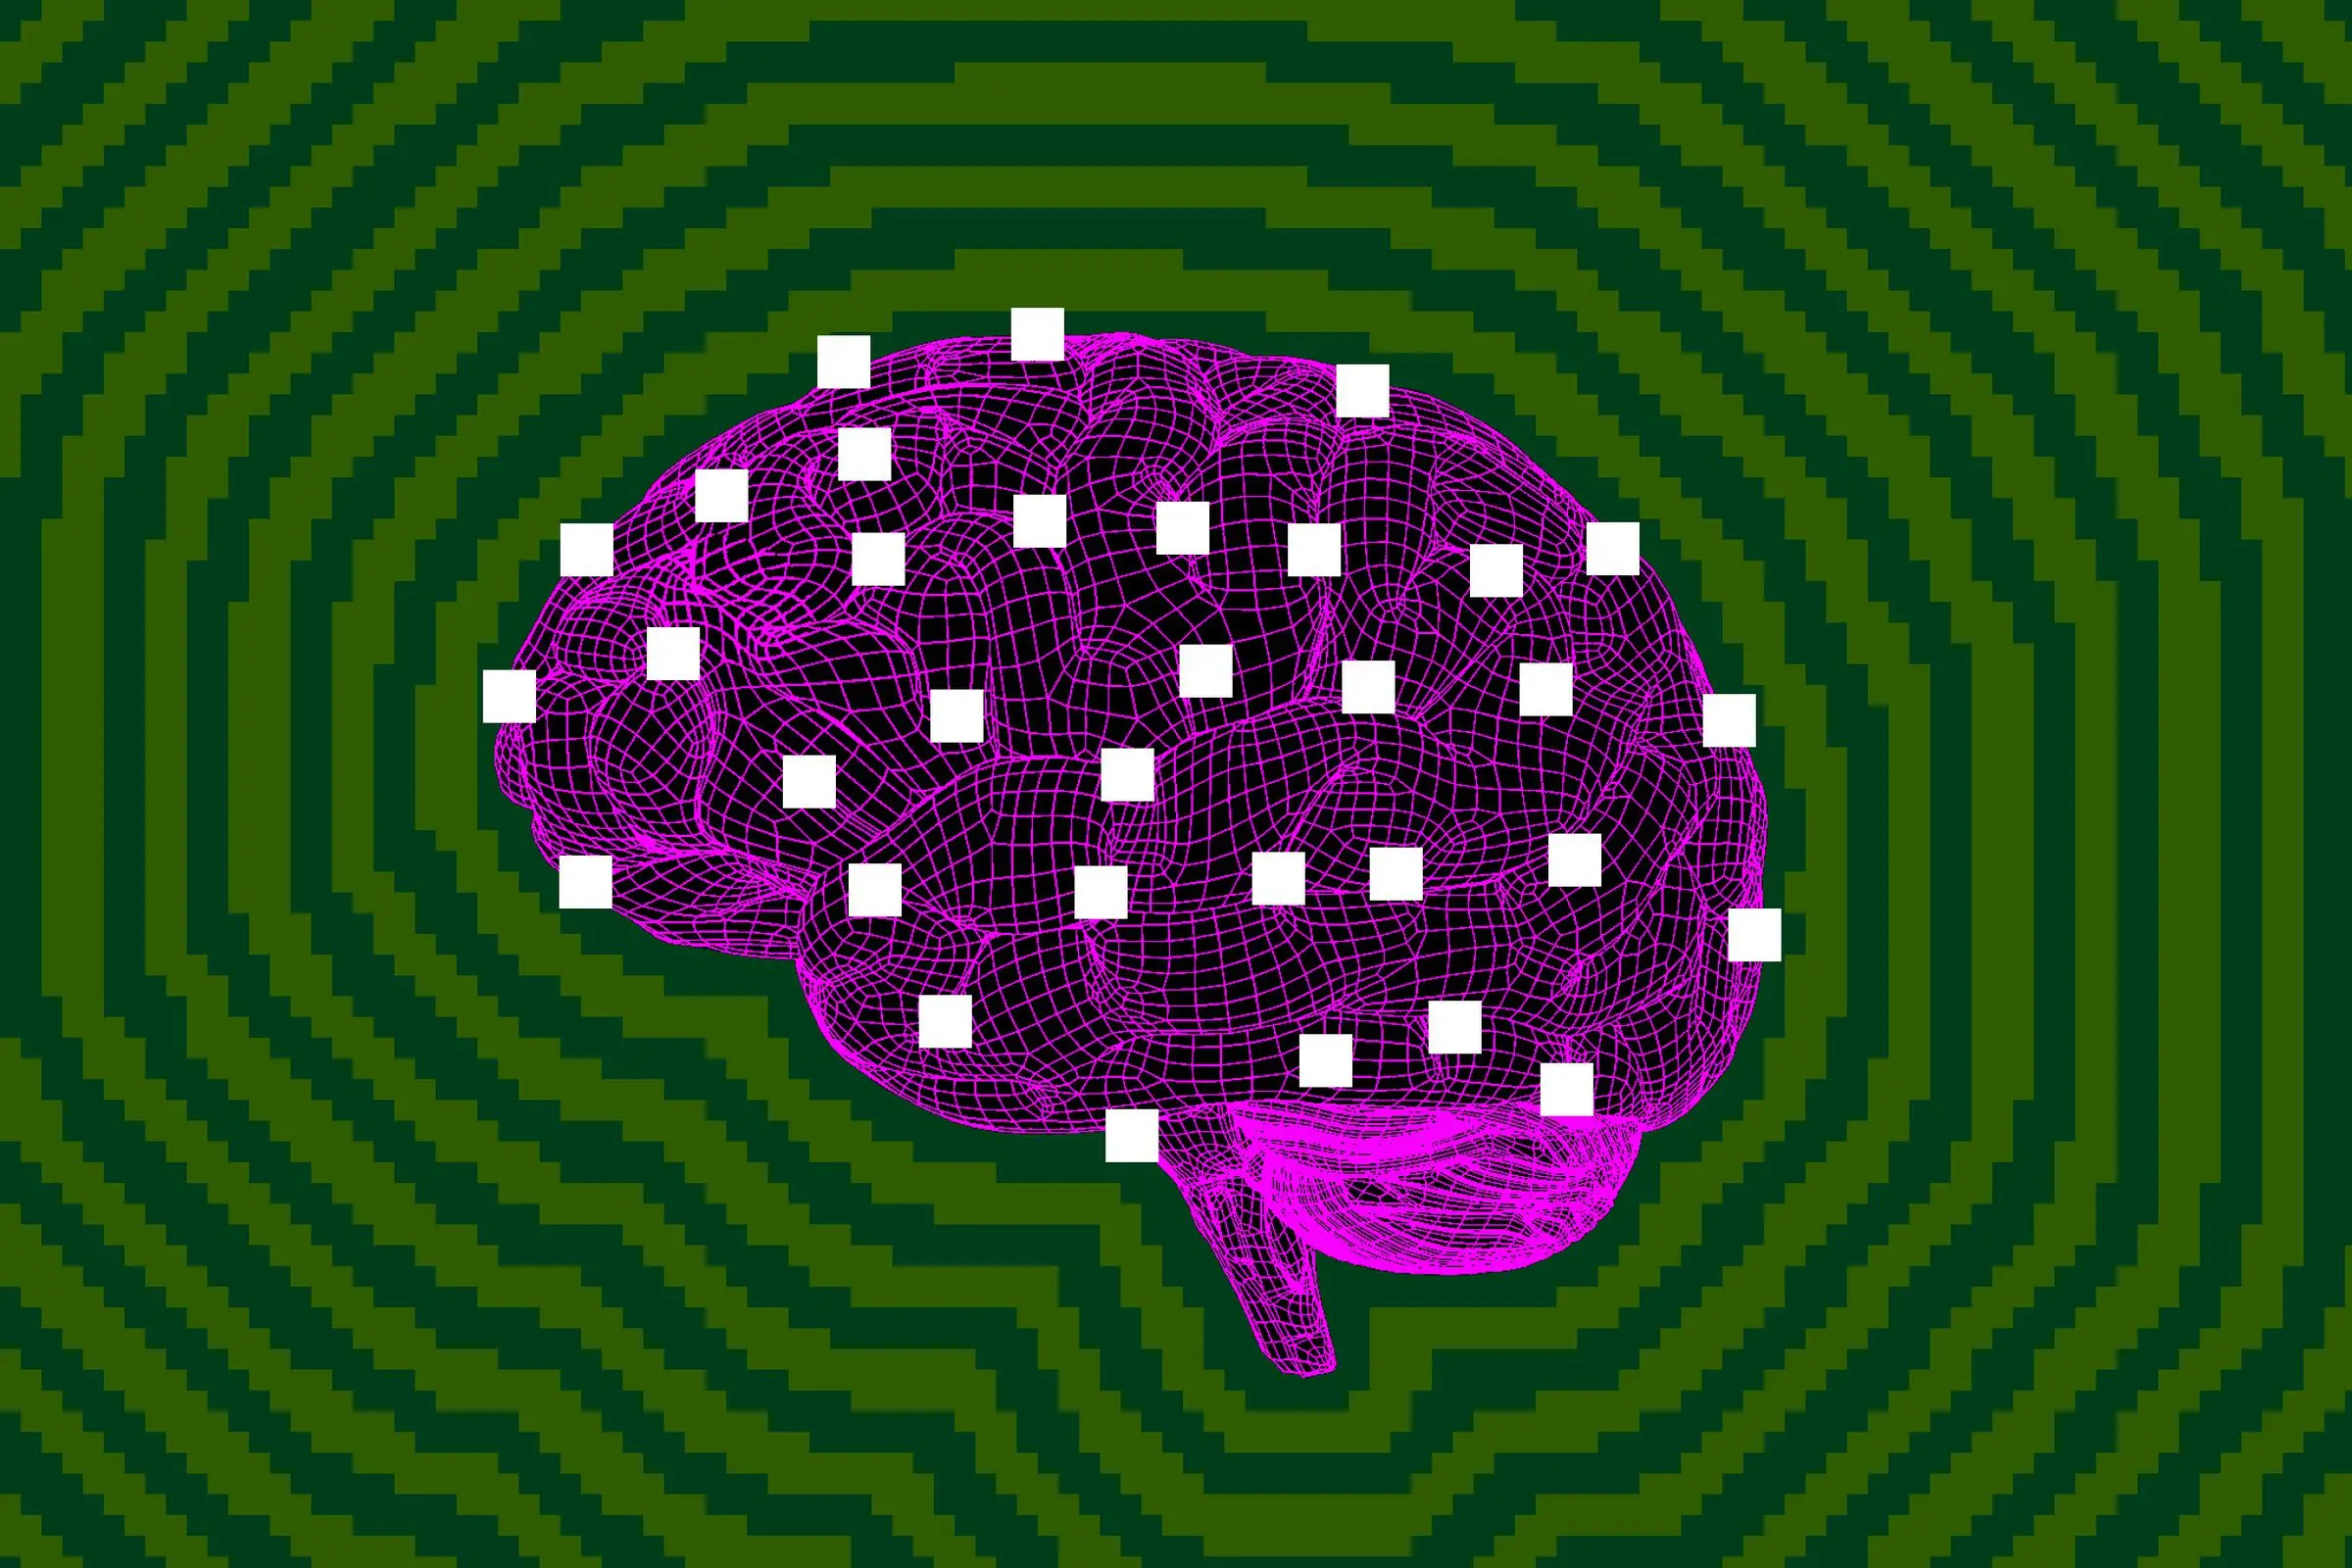 Photo illustration of a brain made of data points.